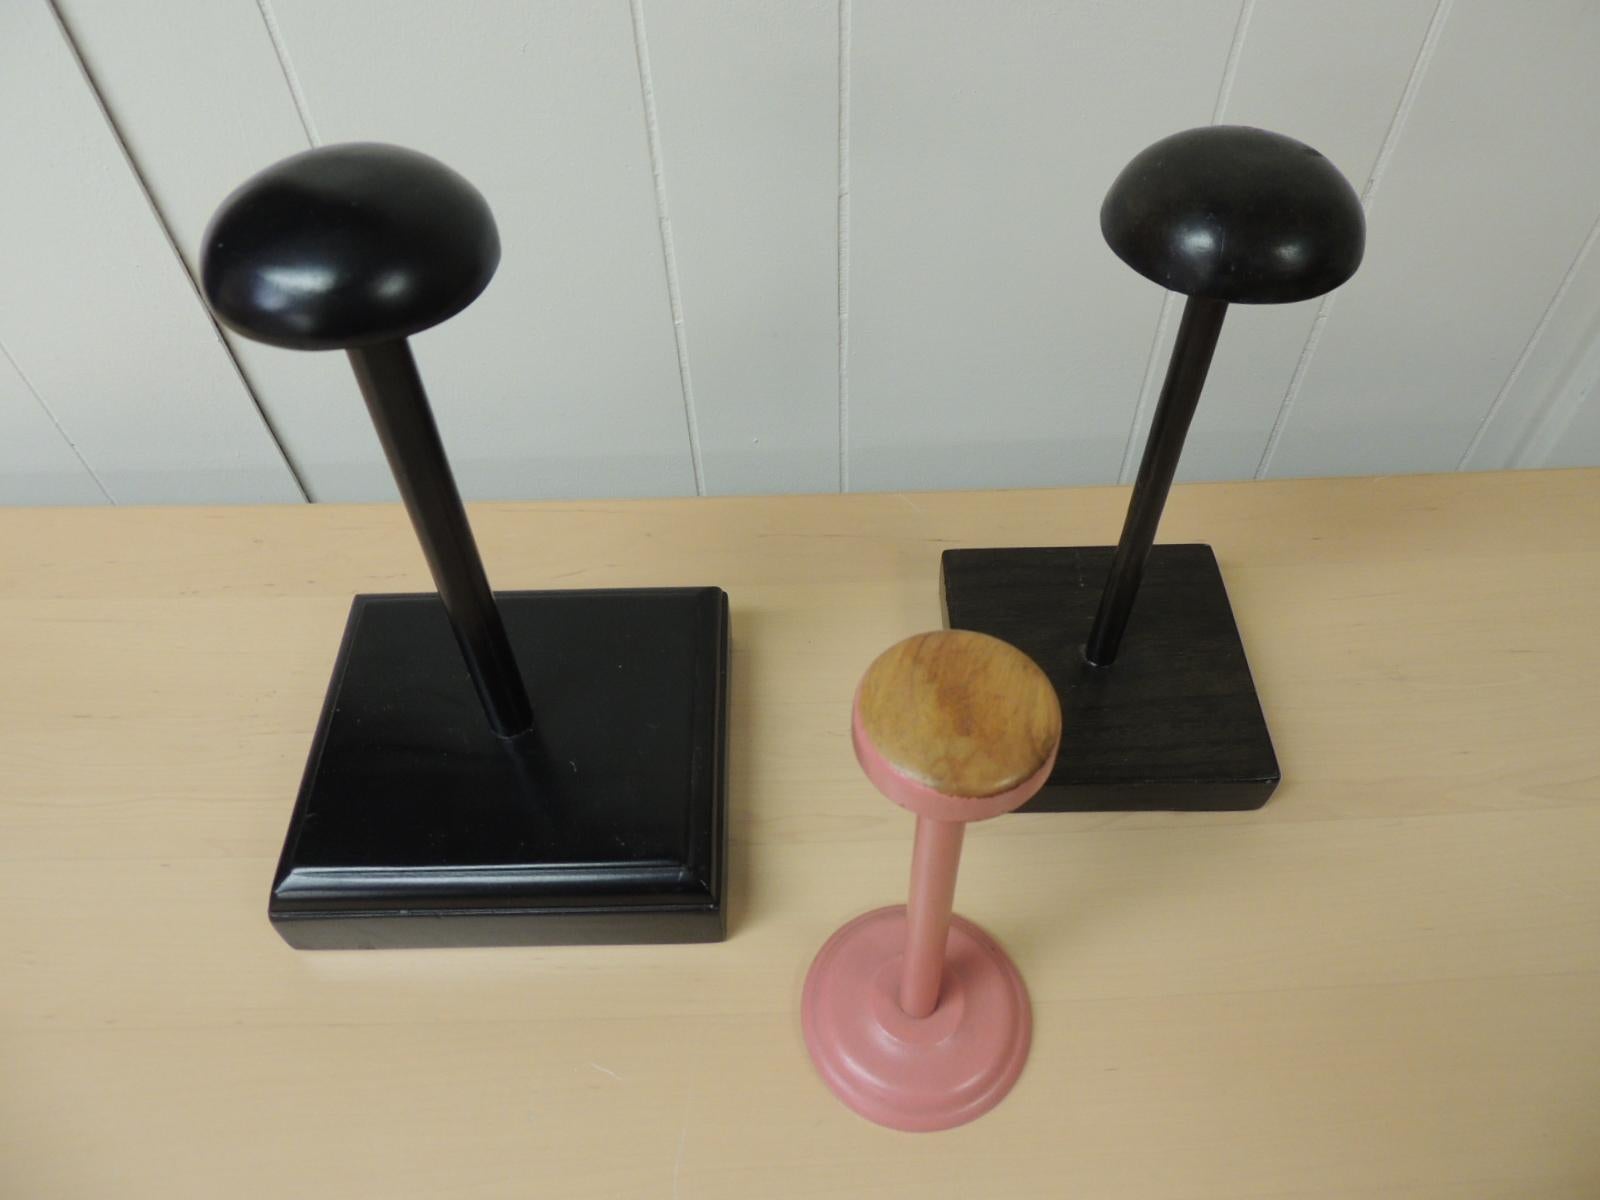 Set of (3) wood hat stands.
One brow, one black and one pink.
Large blk: 8 x 8 x 13 H
Med. brown: 6 x 6 x 12 H
Small pink: 4 x 4 x 9.5 H.